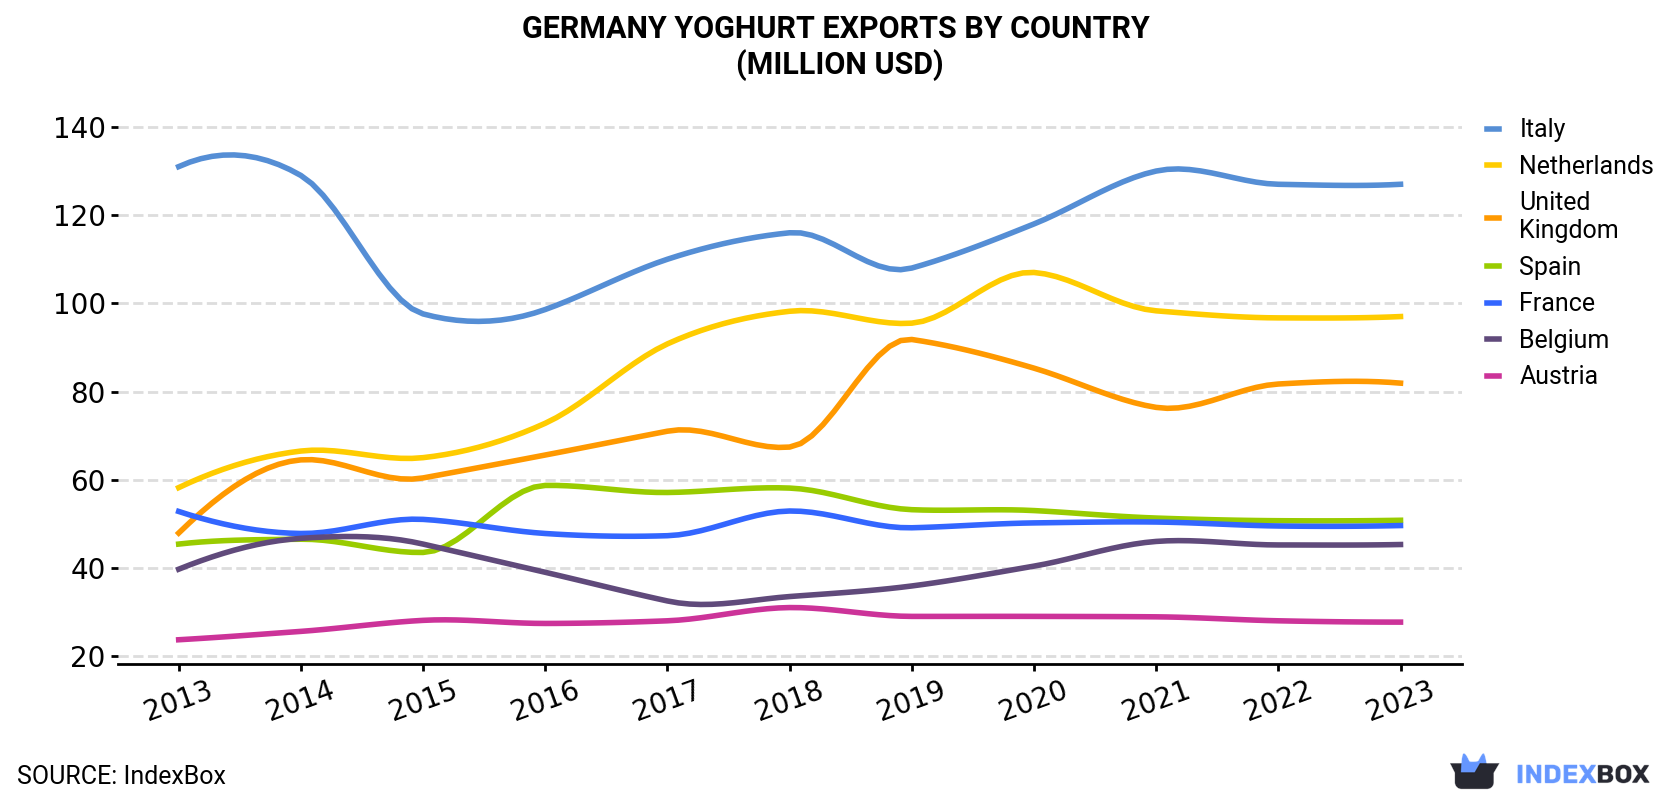 Germany Yoghurt Exports By Country (Million USD)